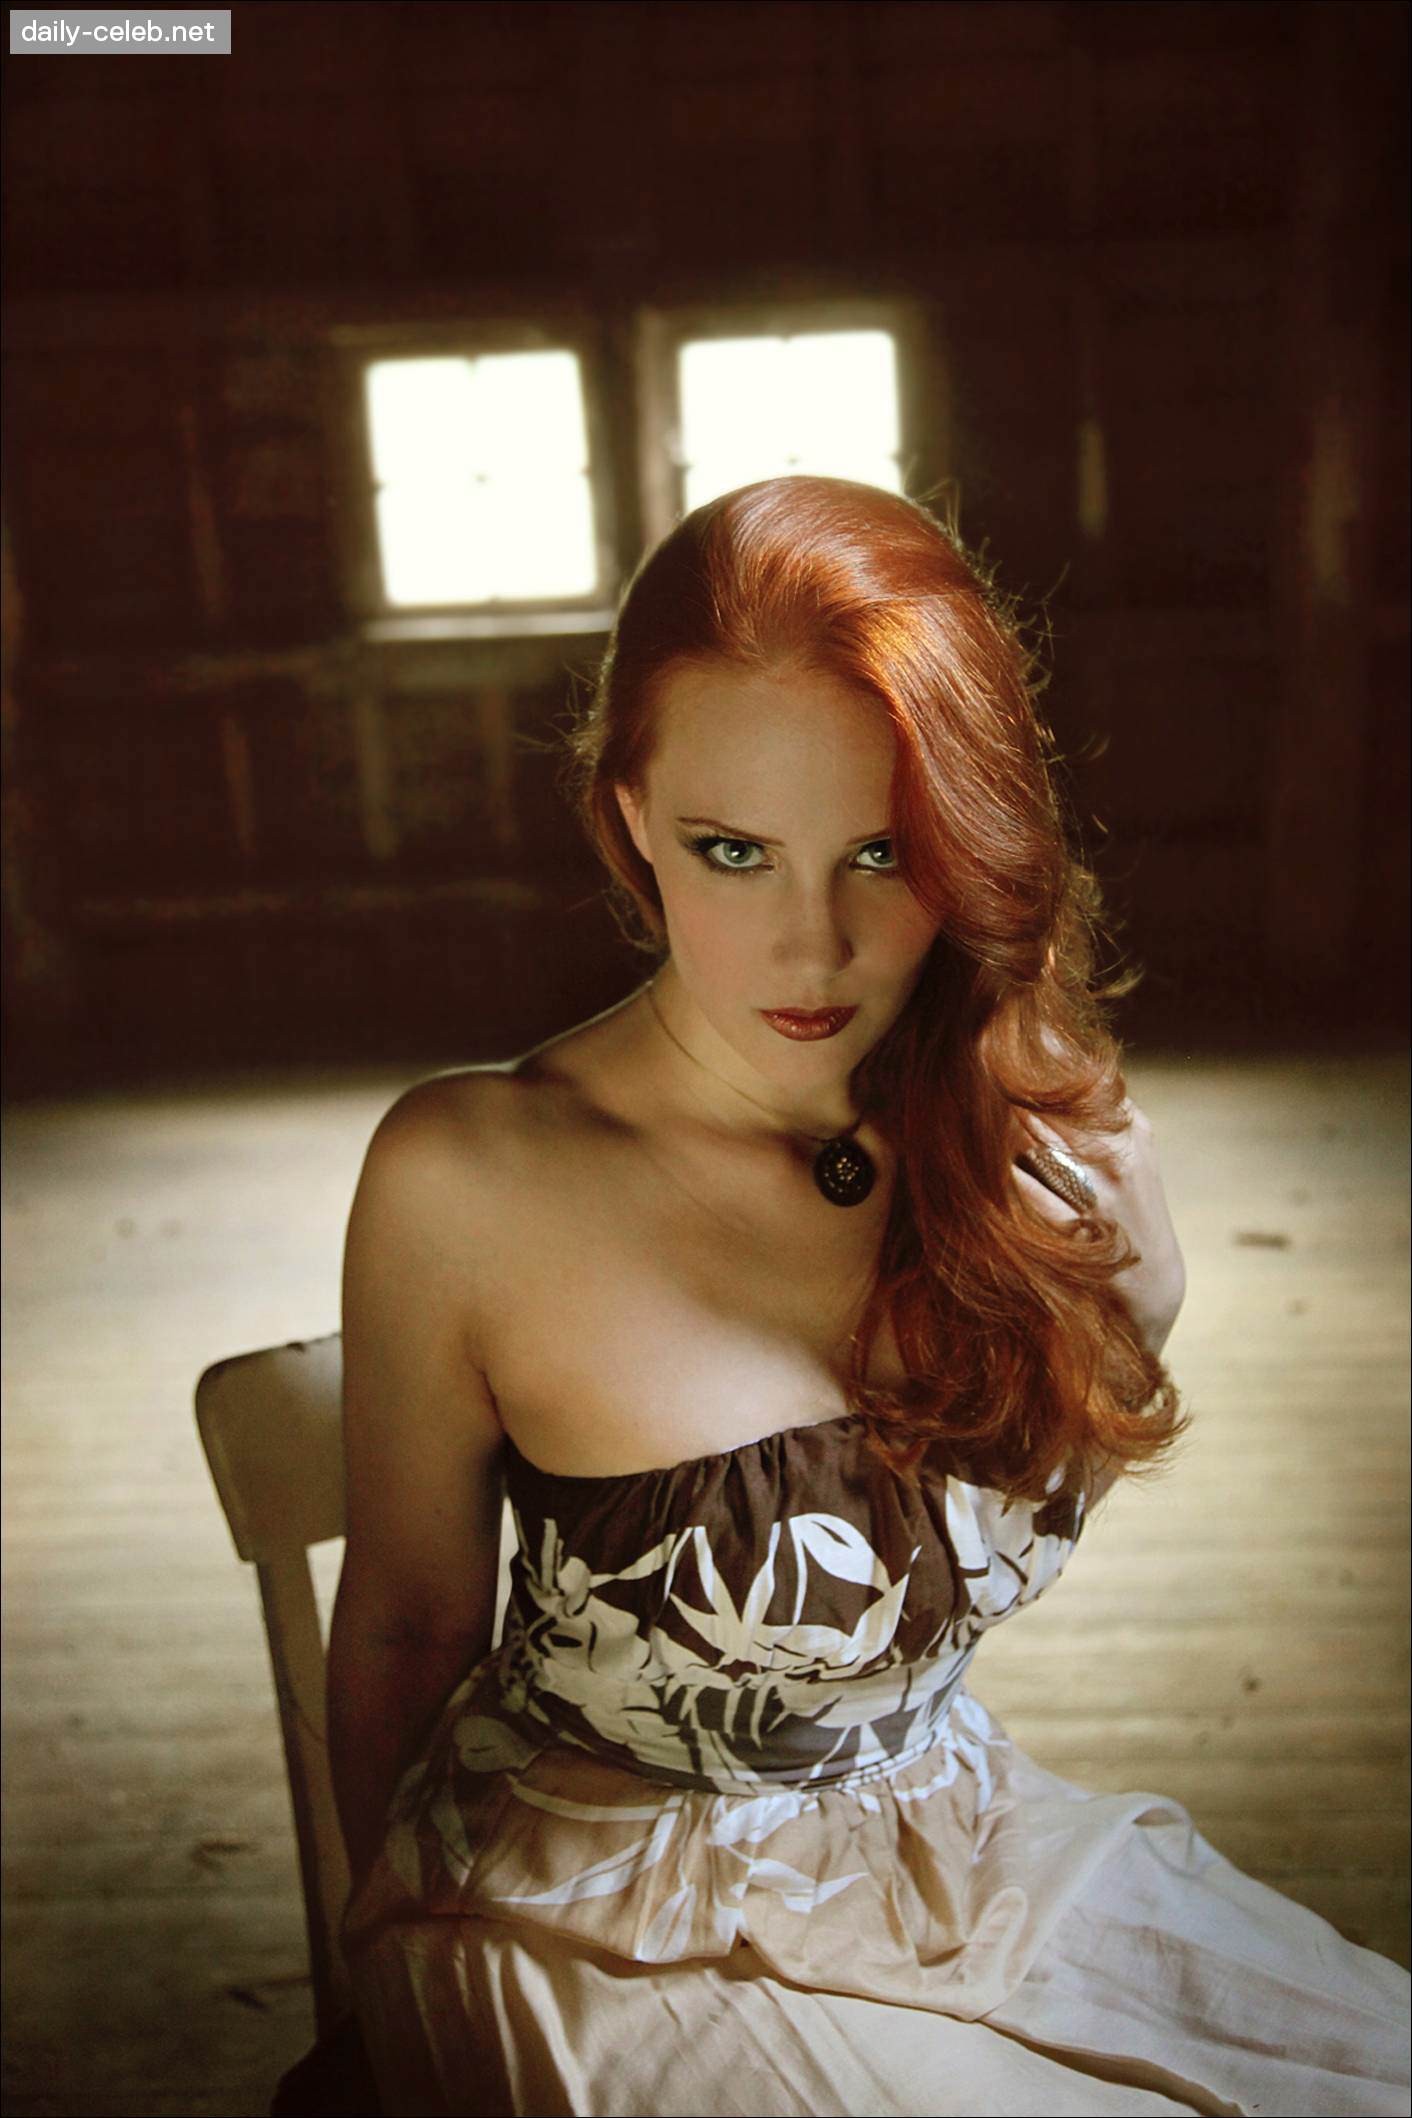 Simone Simons Women Redhead Singer Long Hair Strapless Dress Bare Shoulders Looking At Viewer 1412x2118